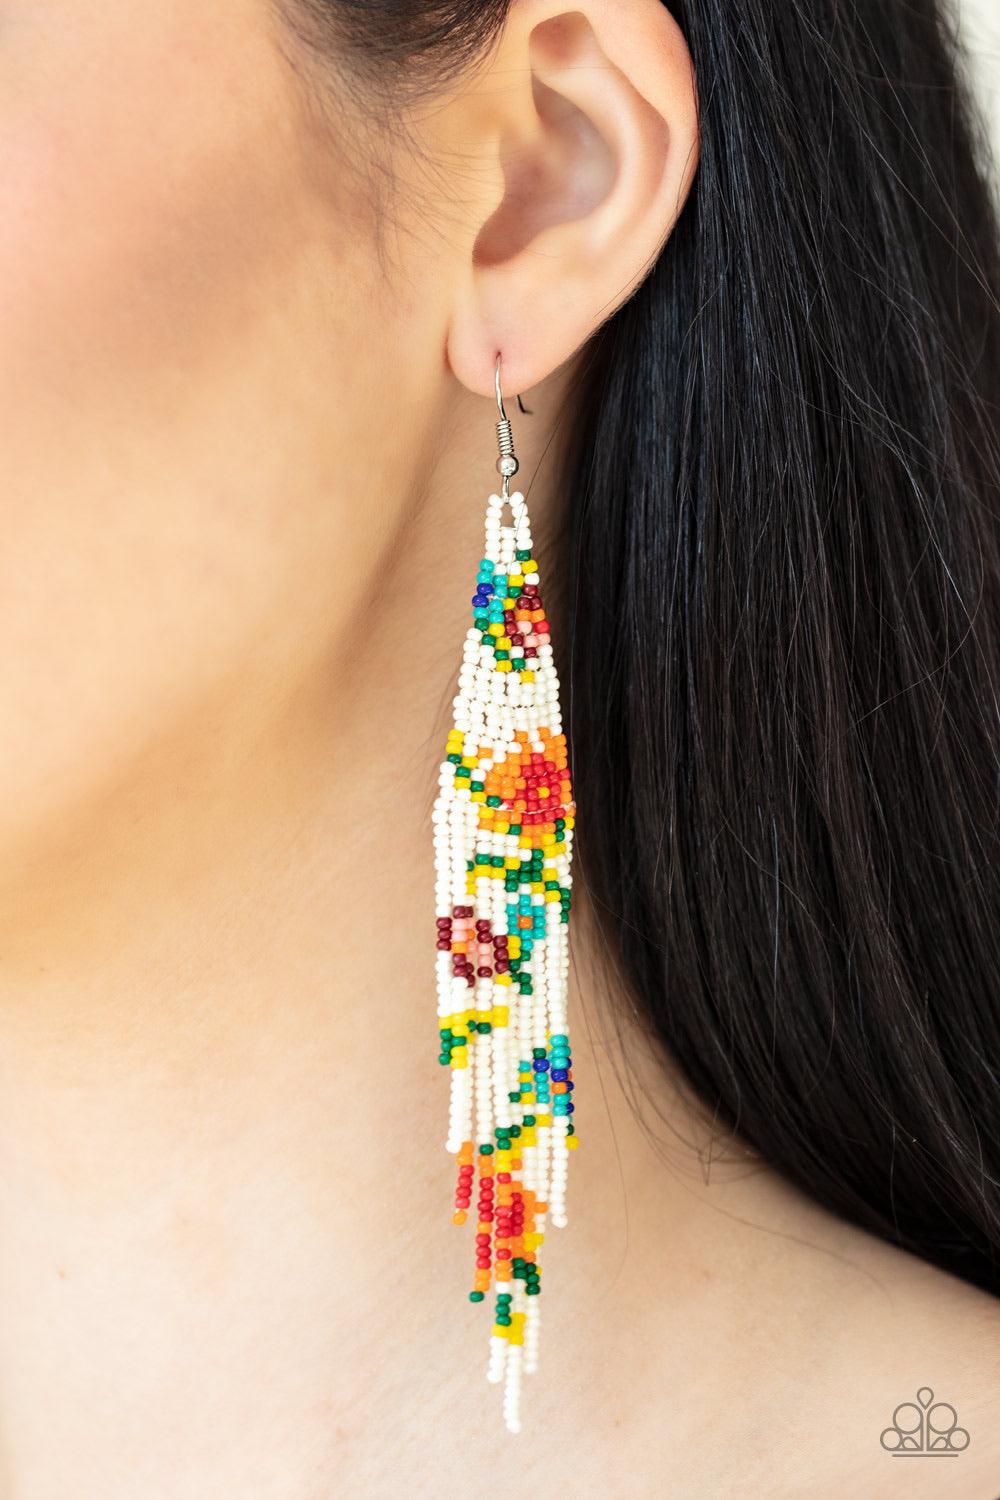 Paparazzi Accessories Beaded Gardens - White Strands of yellow, green, blue, white, red, orange, and pink seed beads colorfully weave into a vivaciously floral beaded fringe. Earring attaches to a standard fishhook fitting. Jewelry